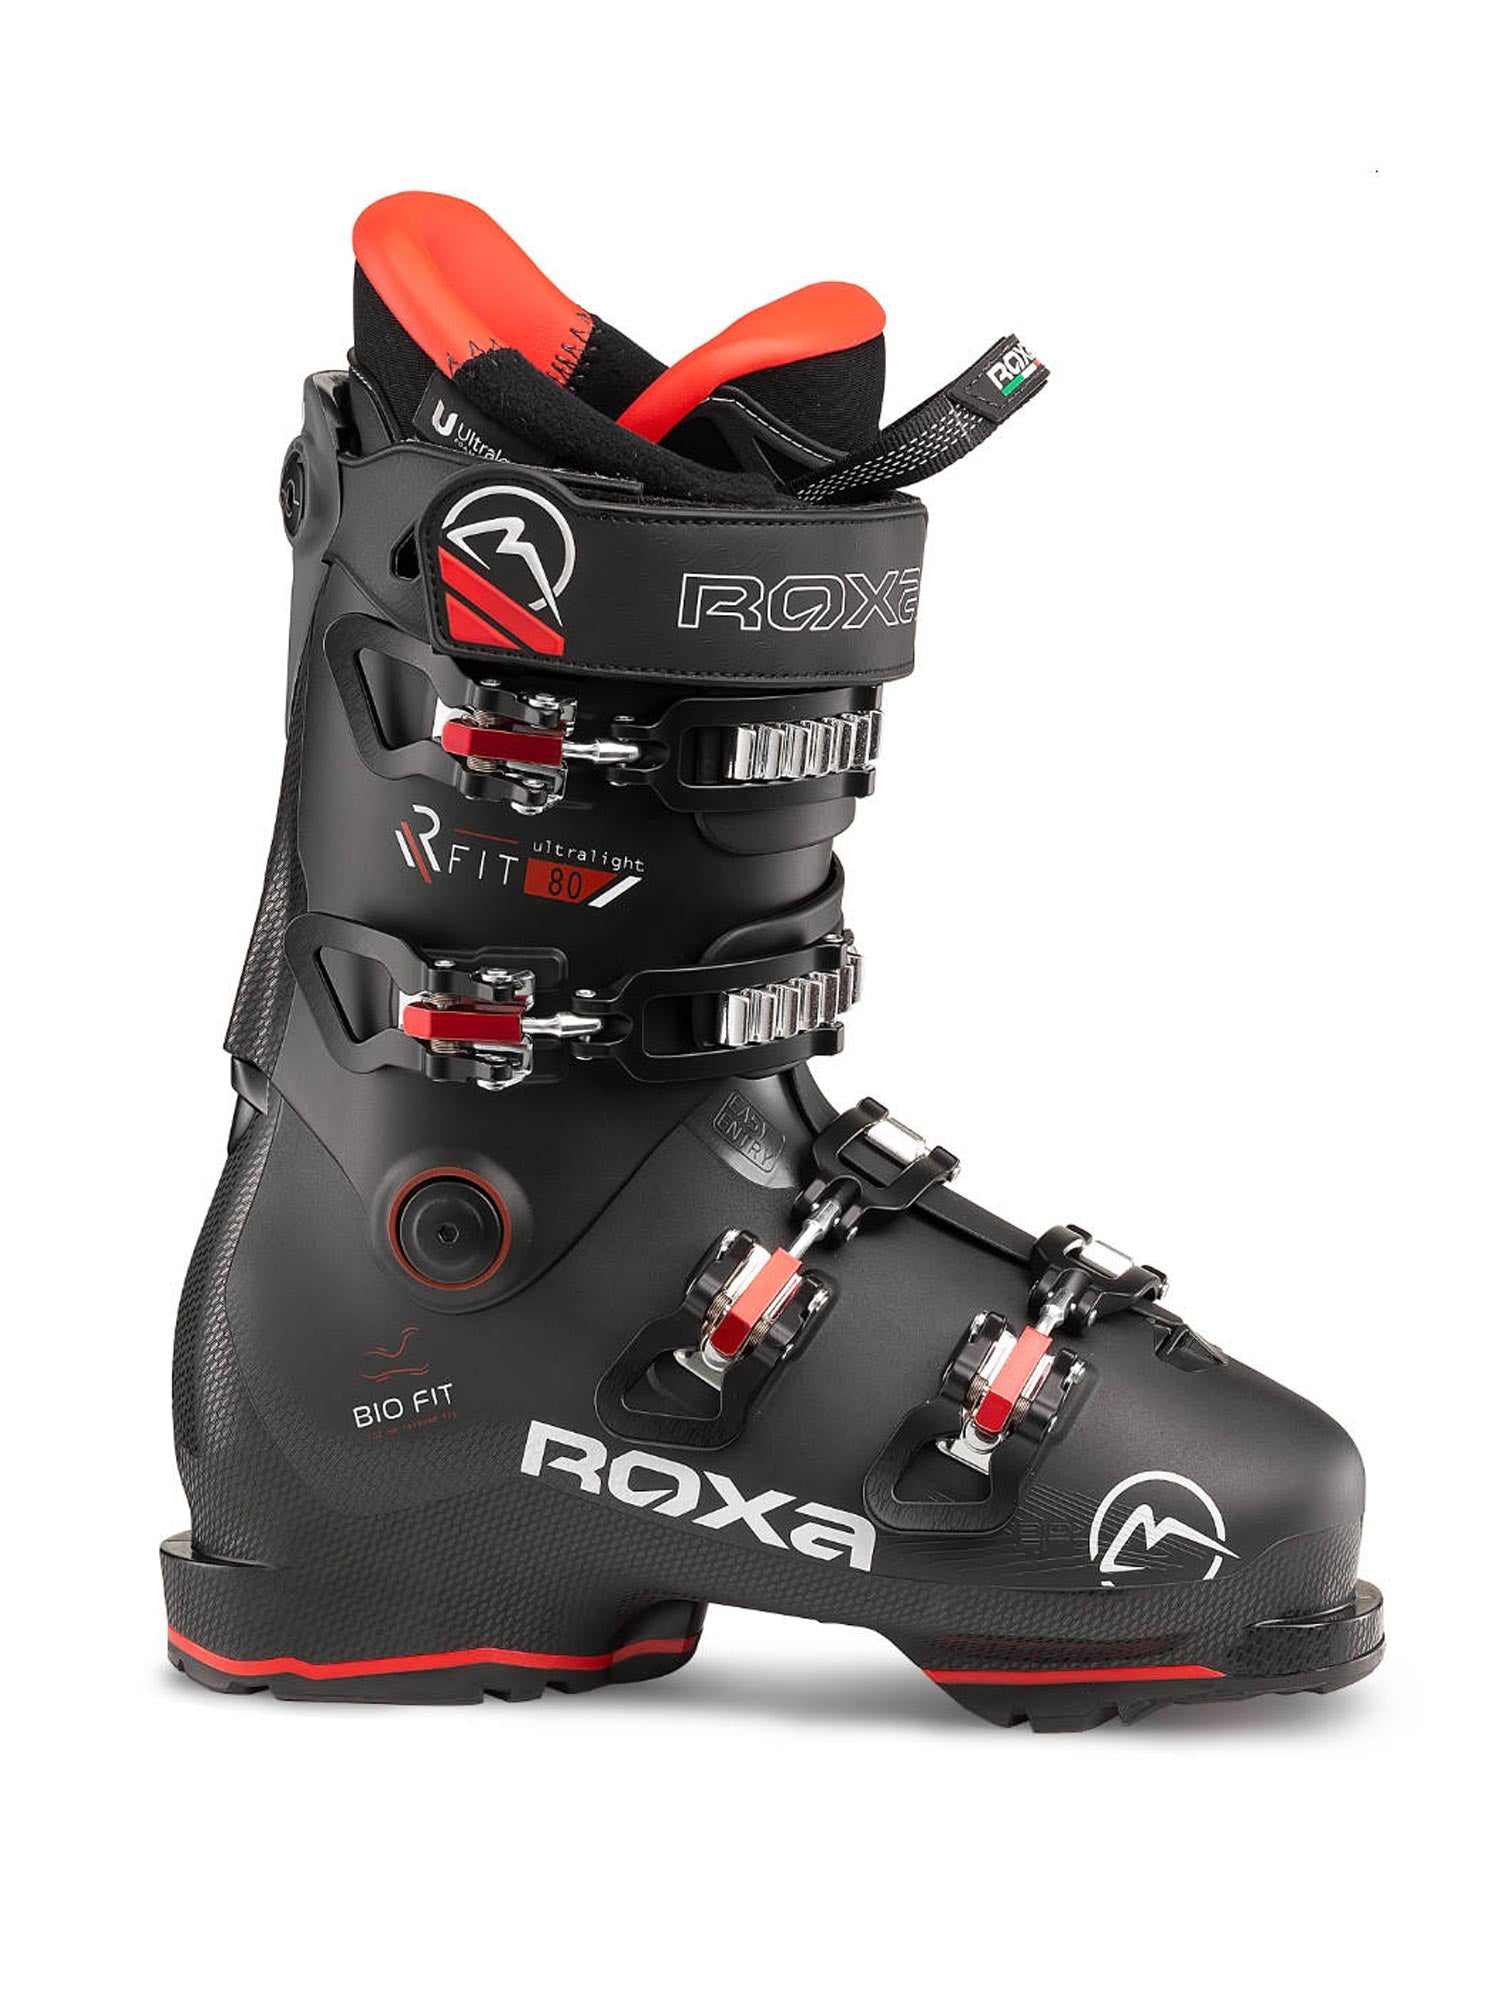 Black and red Roxa RFit 80 ski boots